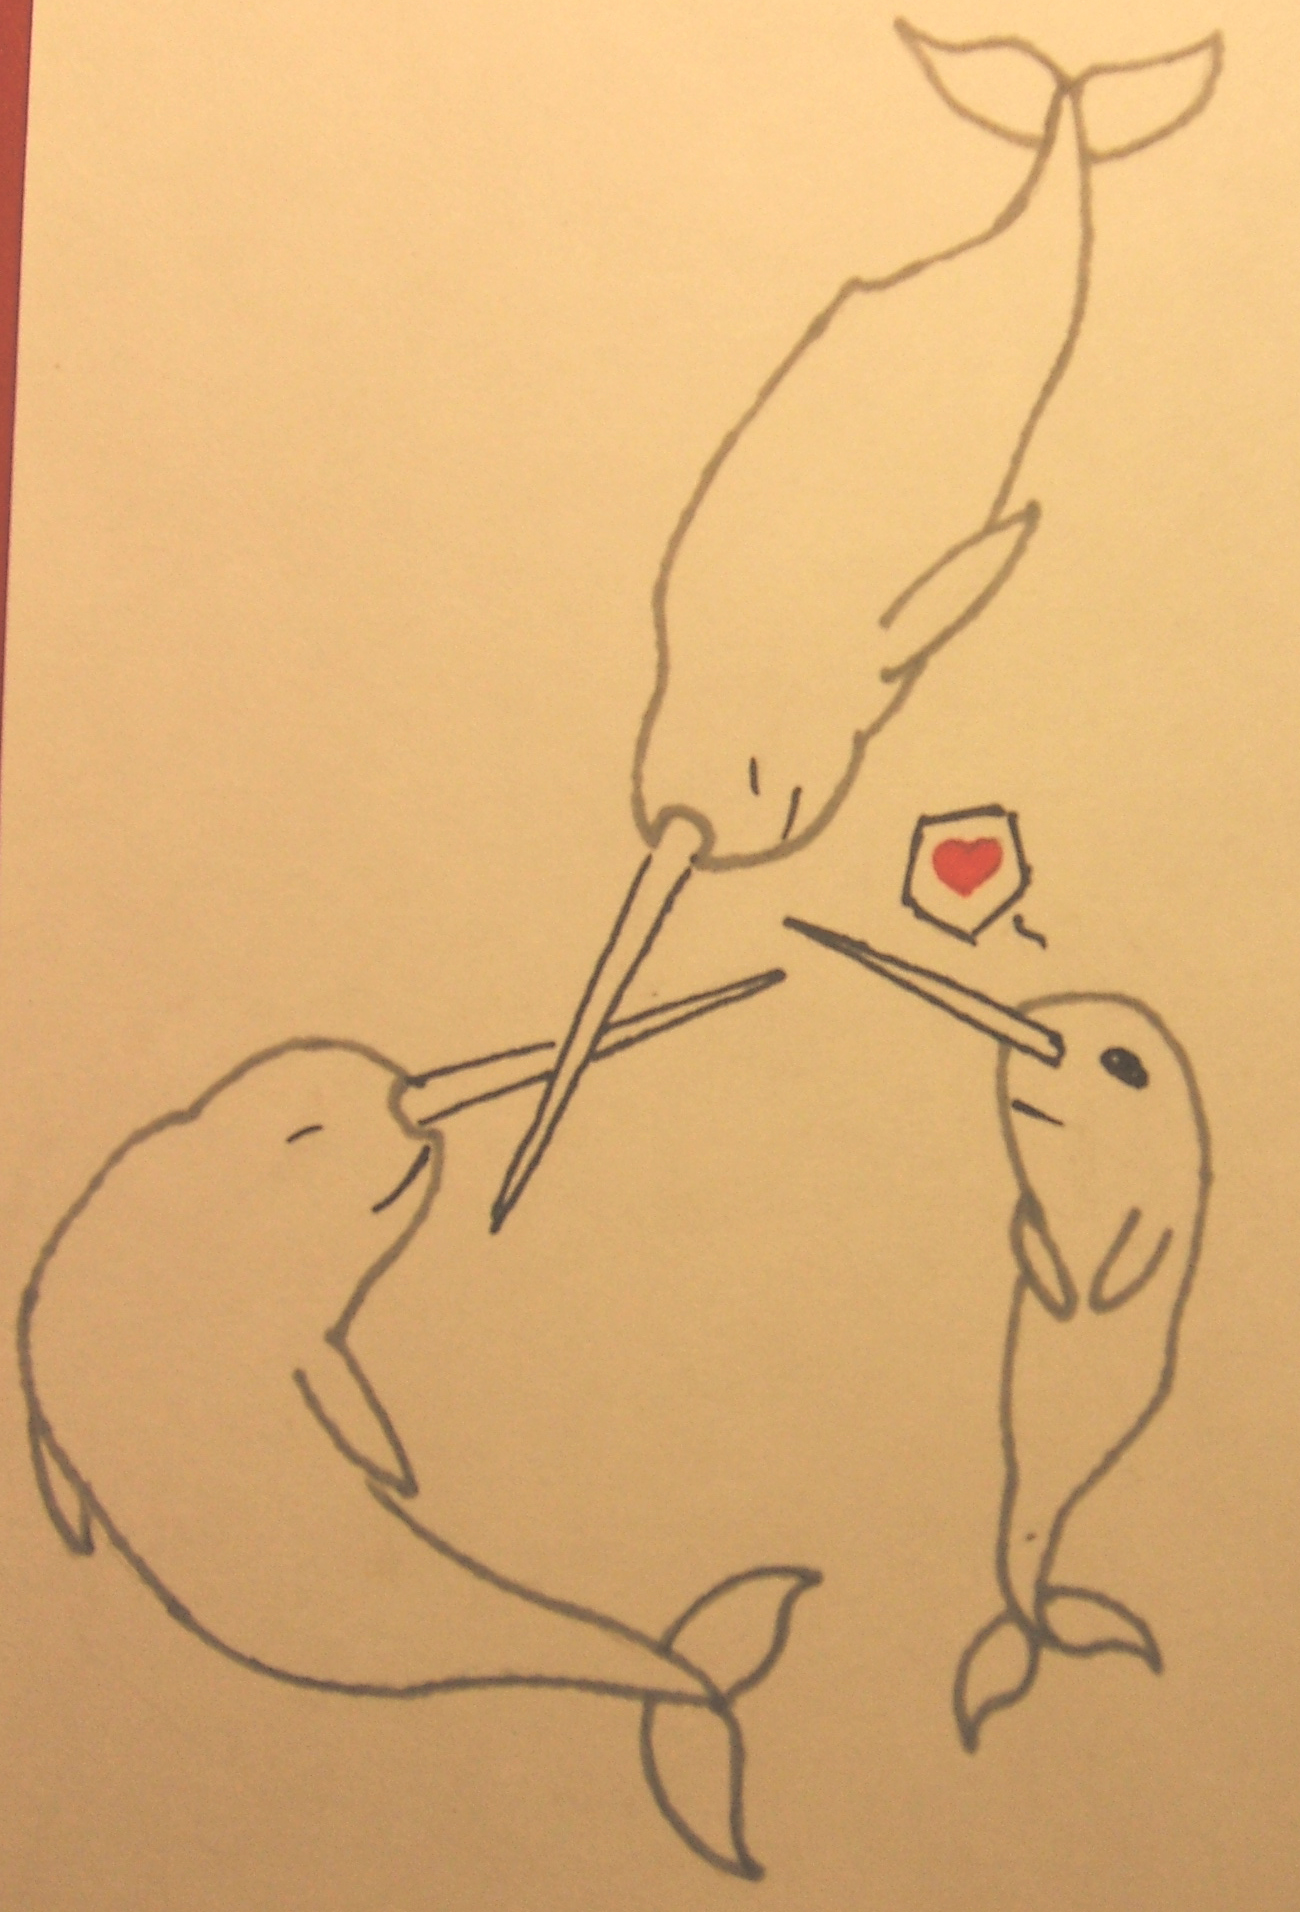 Narwhal Love by blackdragon1991